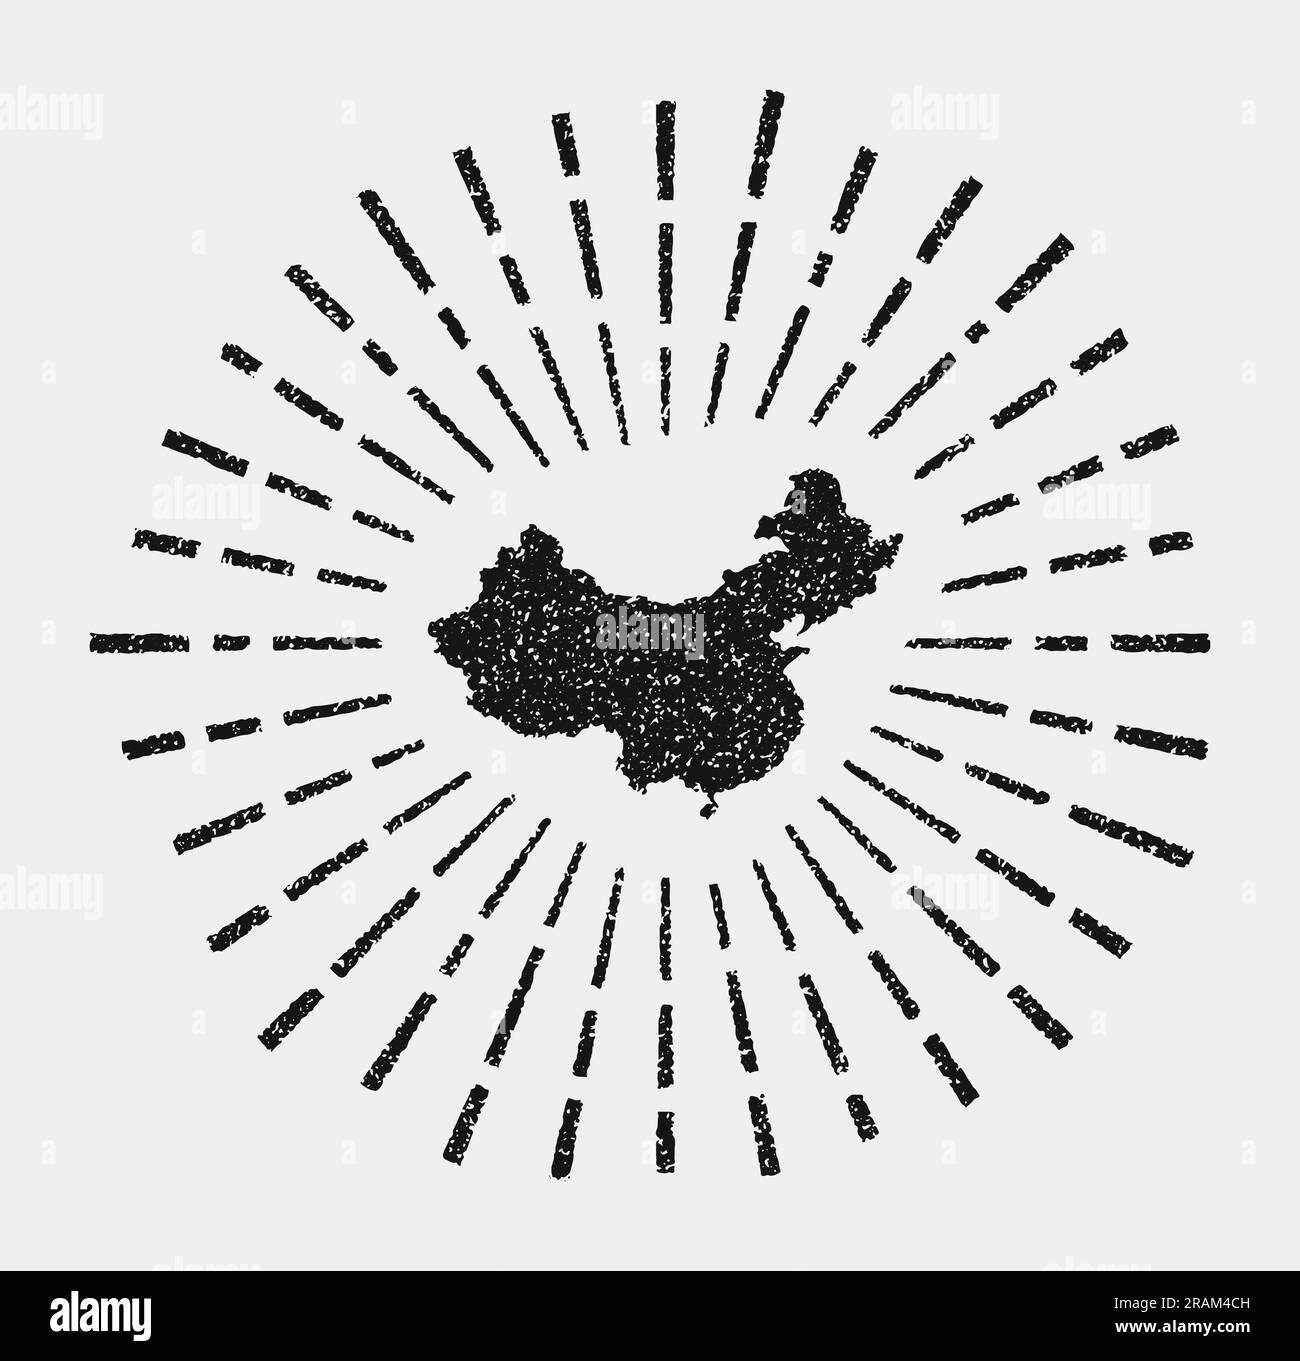 Vintage map of China. Grunge sunburst around the country. Black China shape with sun rays on white background. Vector illustration. Stock Vector